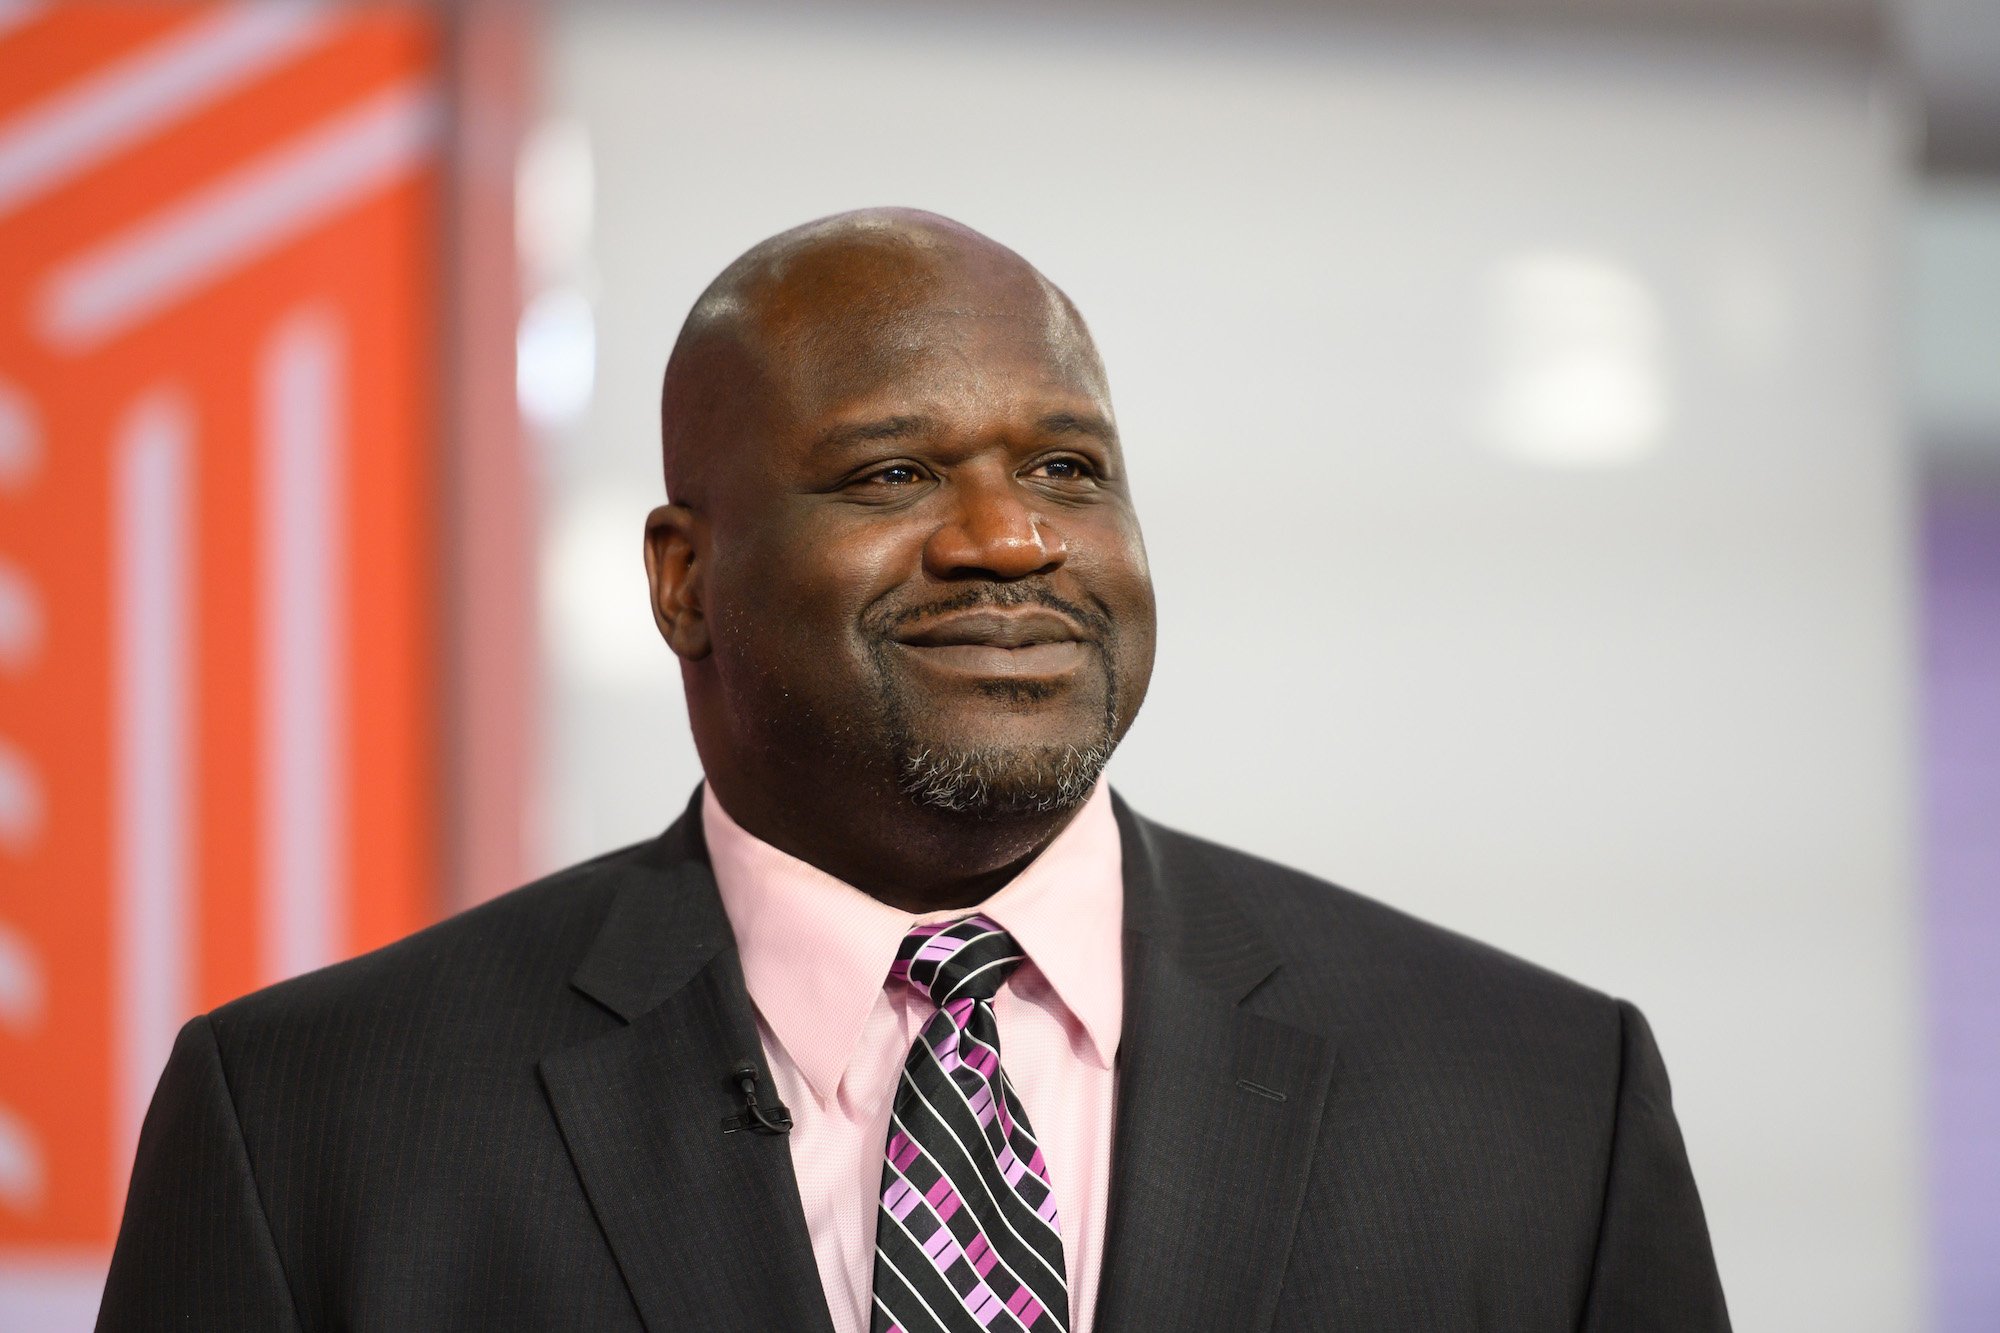 Shaquille O’Neal Reveals How He Spent His First Million—’I Knew Nothing’